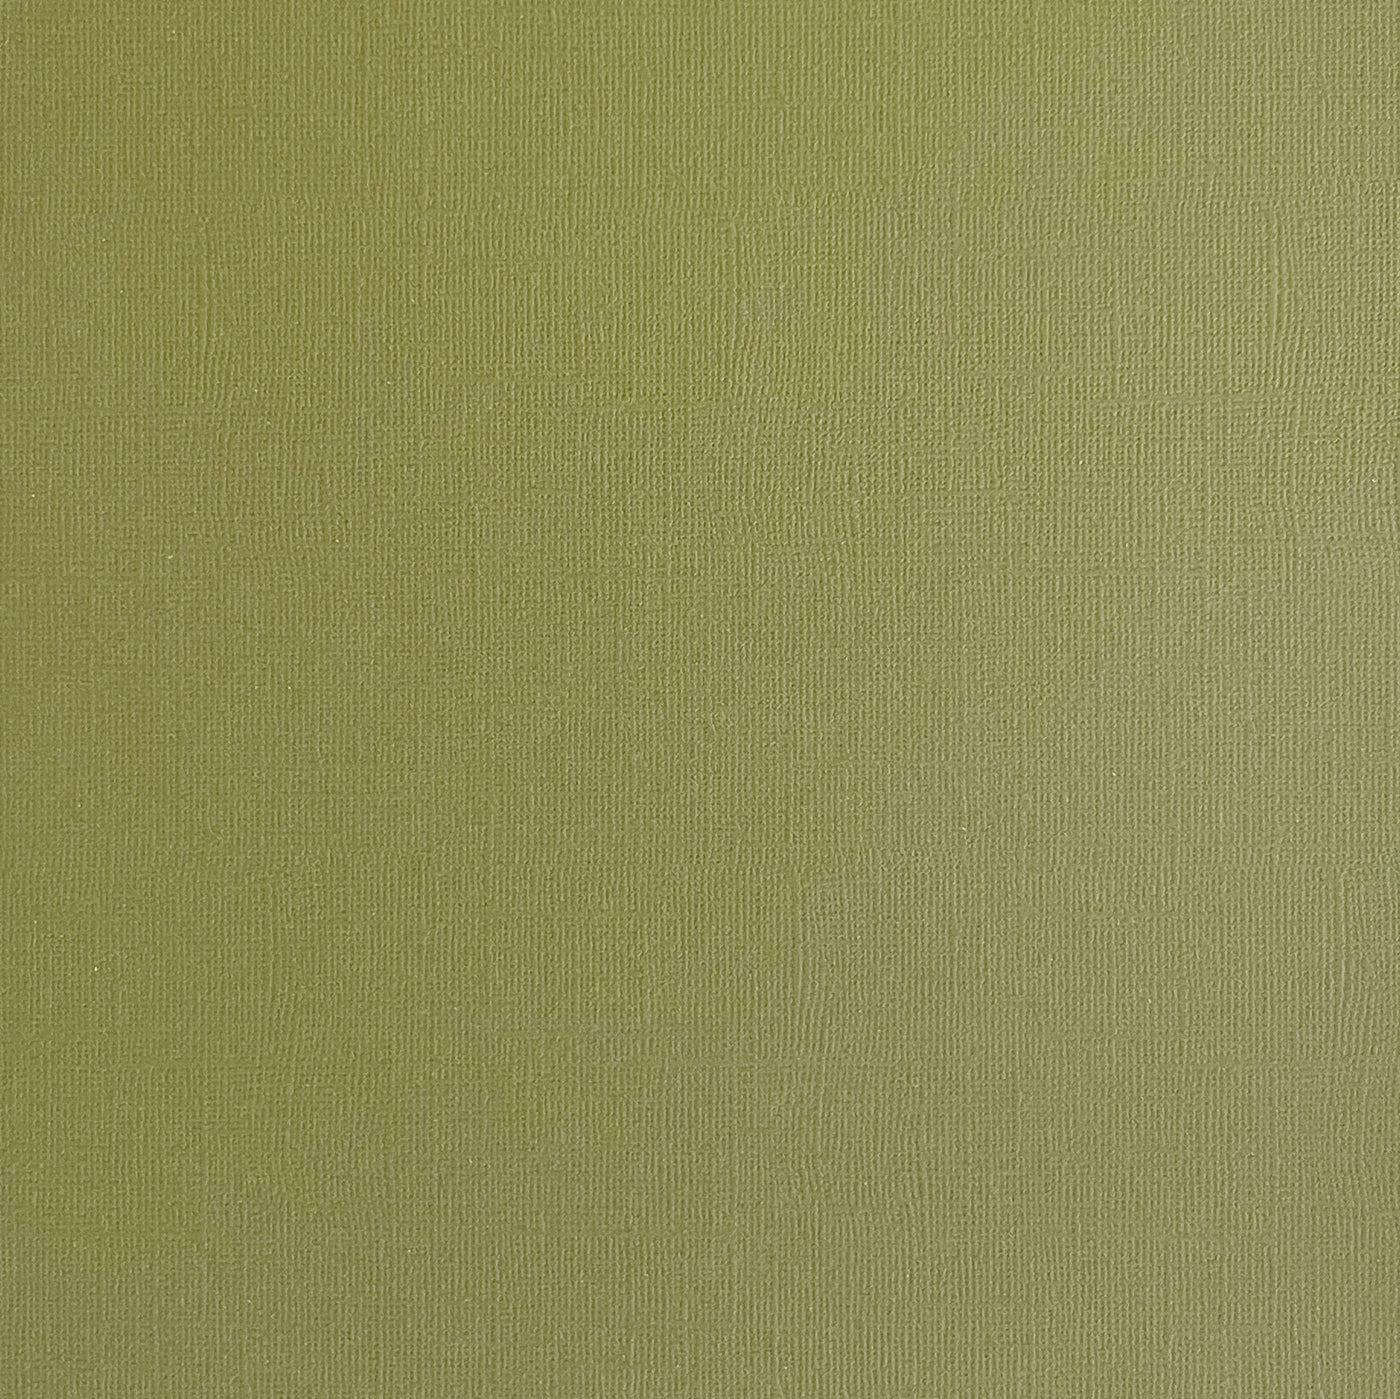 THYME - Light Sage Green Textured 12x12 Cardstock - Encore Paper